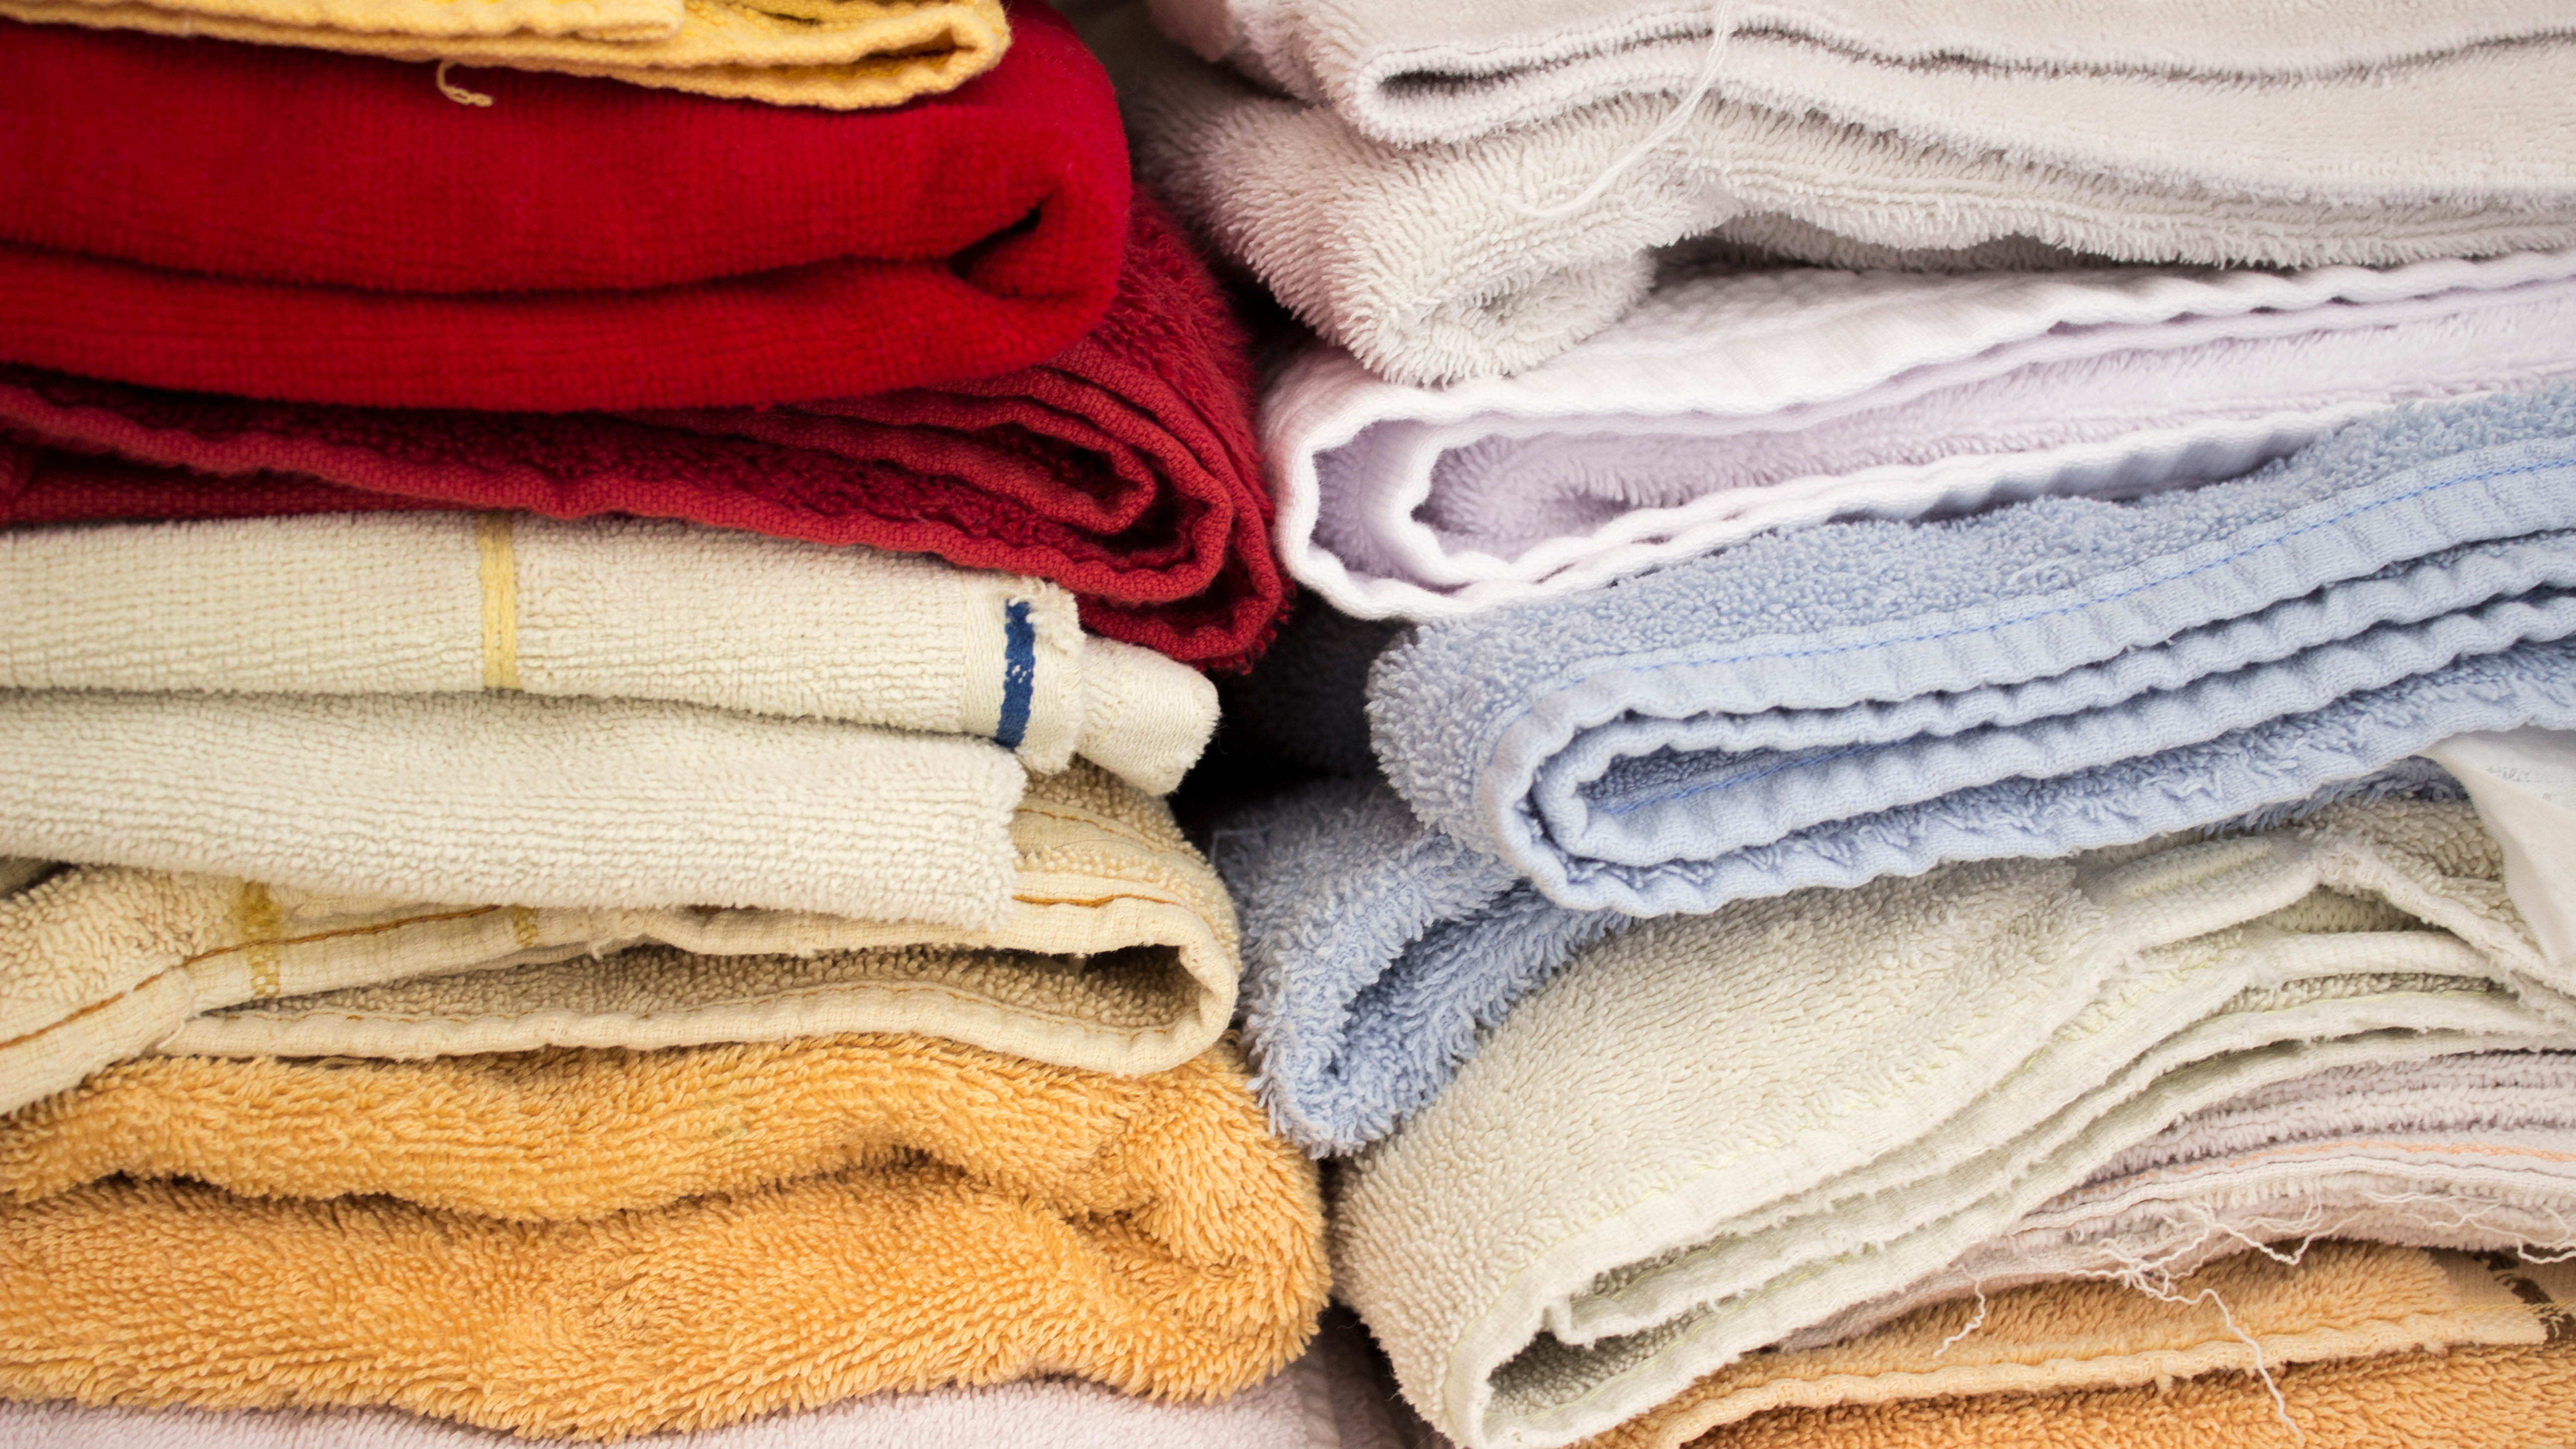 Piles of old towels